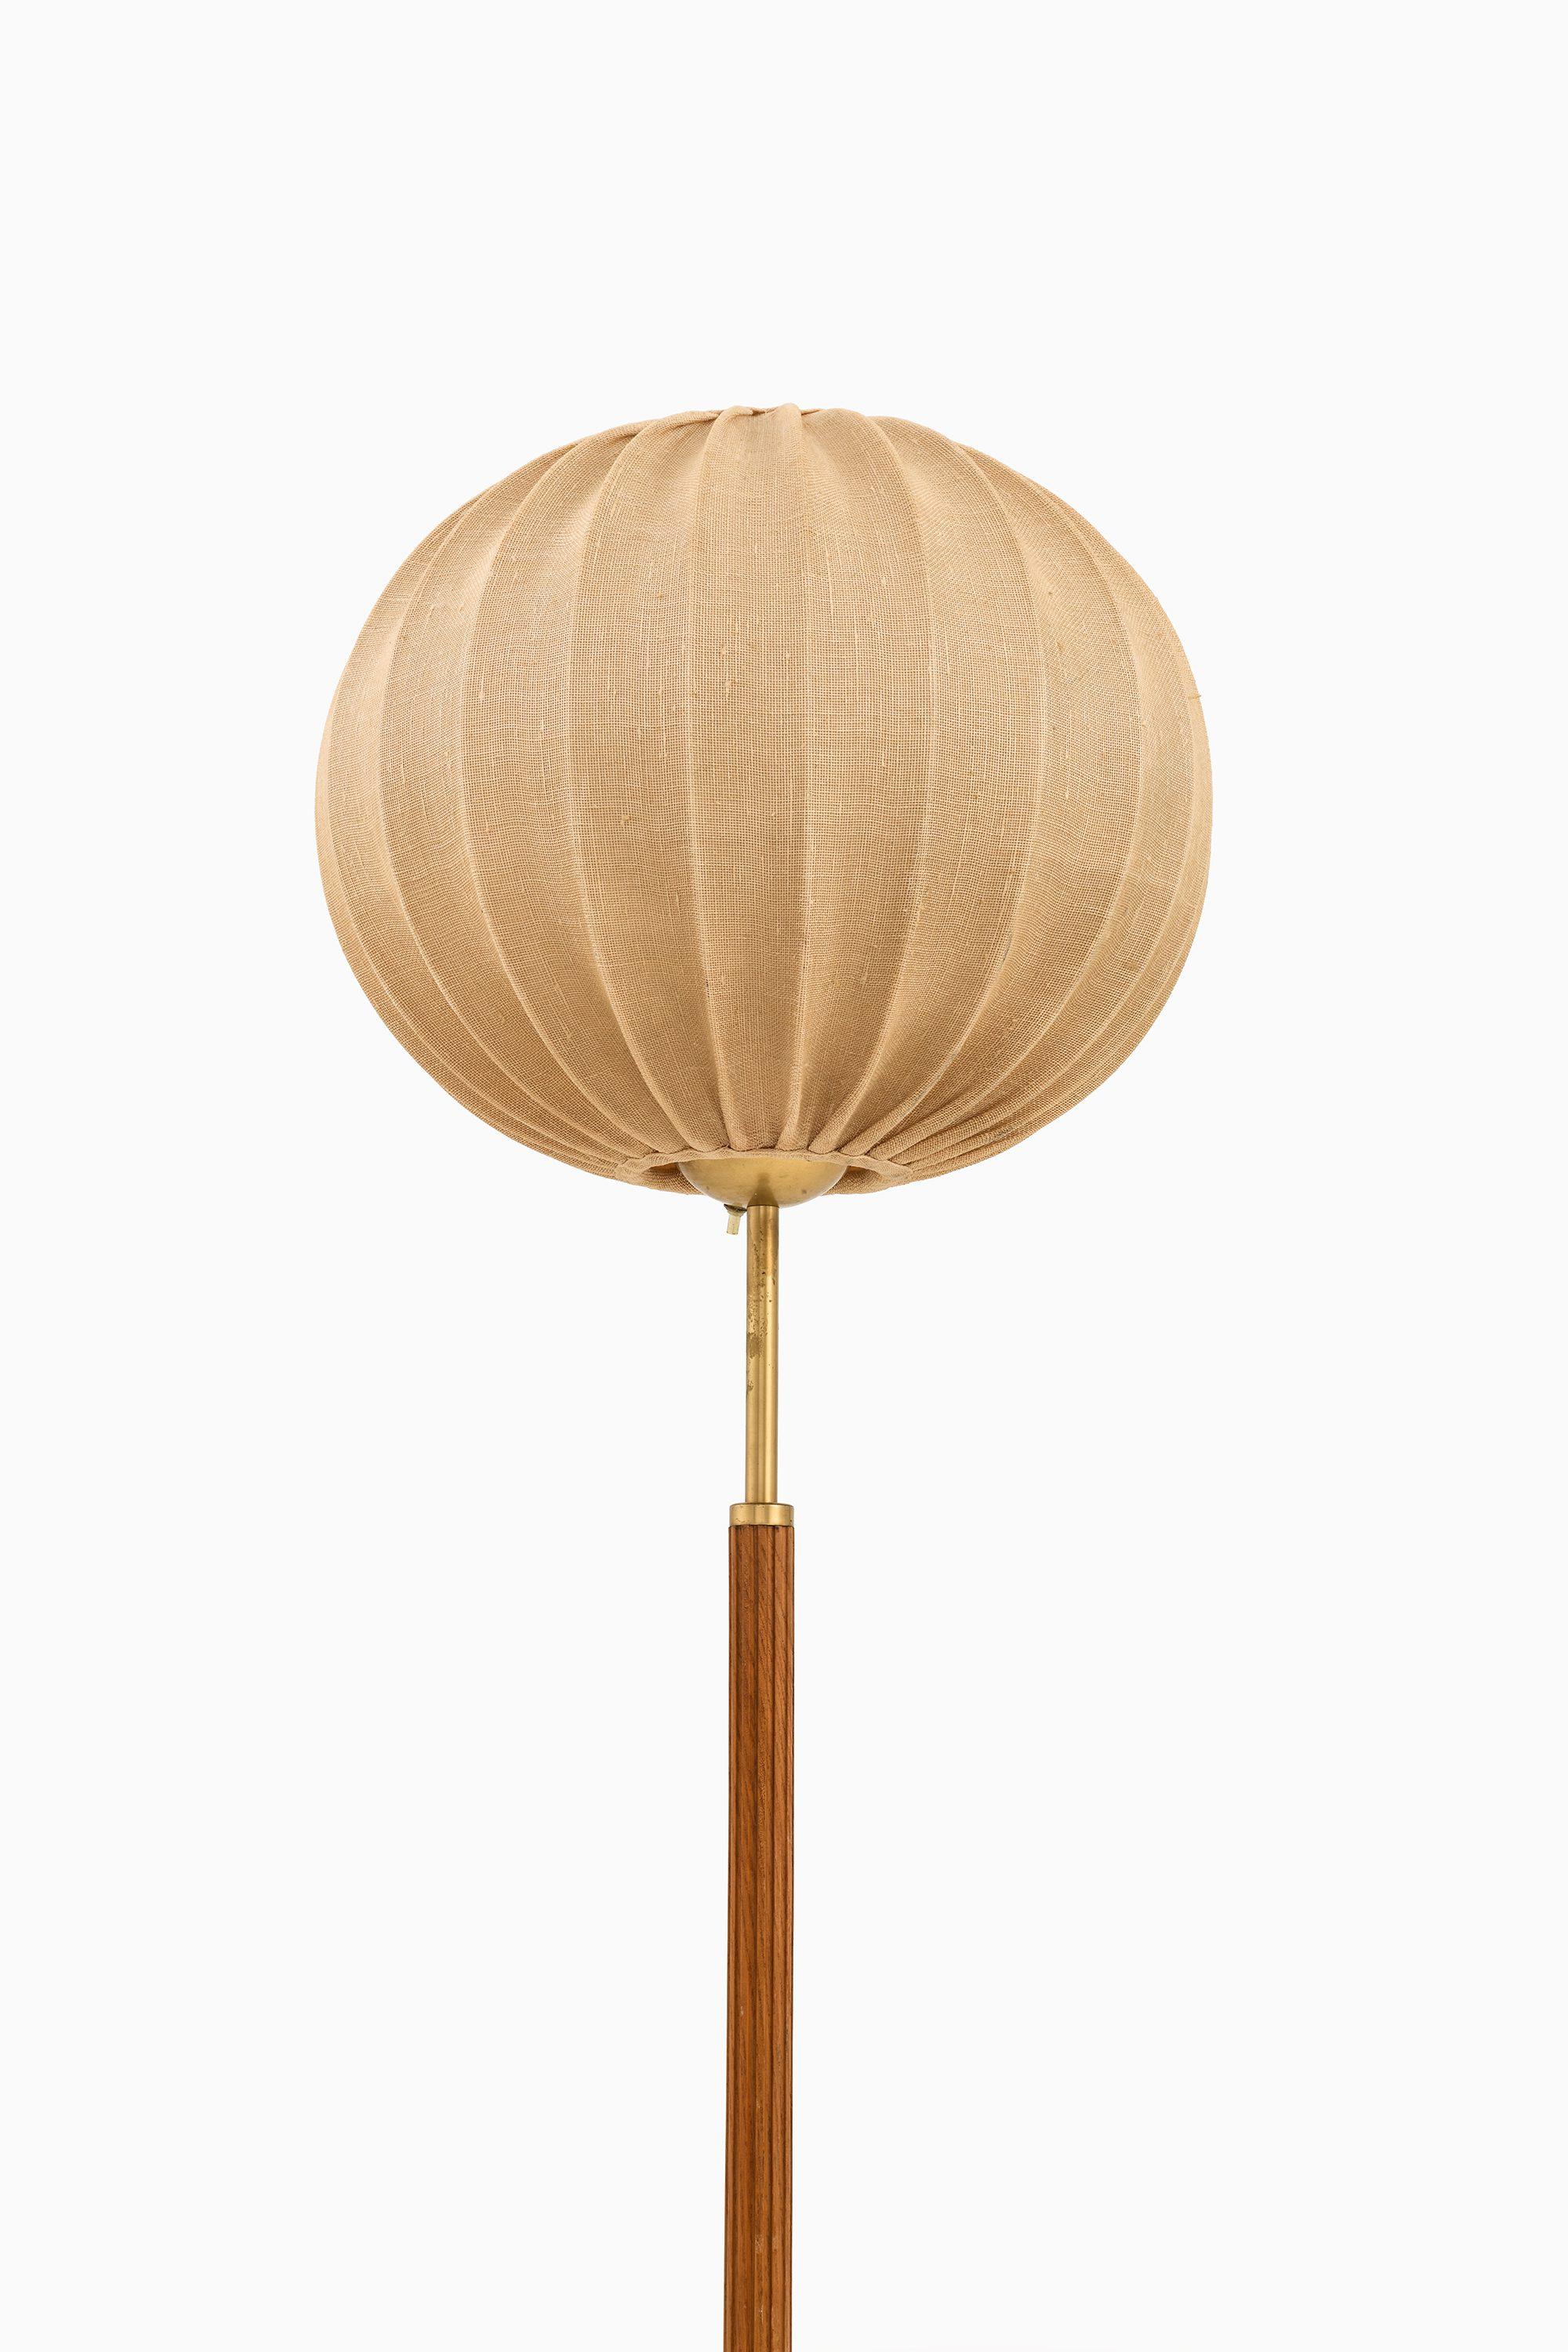 Floor Lamp in Brass and Fabric by Hans Bergström, 1950's

Additional Information:
Material: Brass and fabric
Style: Mid century, Scandinavian
Rare floor lamp model C-770
Produced by Ateljé Lyktan in Åhus, Sweden
Dimensions (W x D x H): 45 x 45 x 173